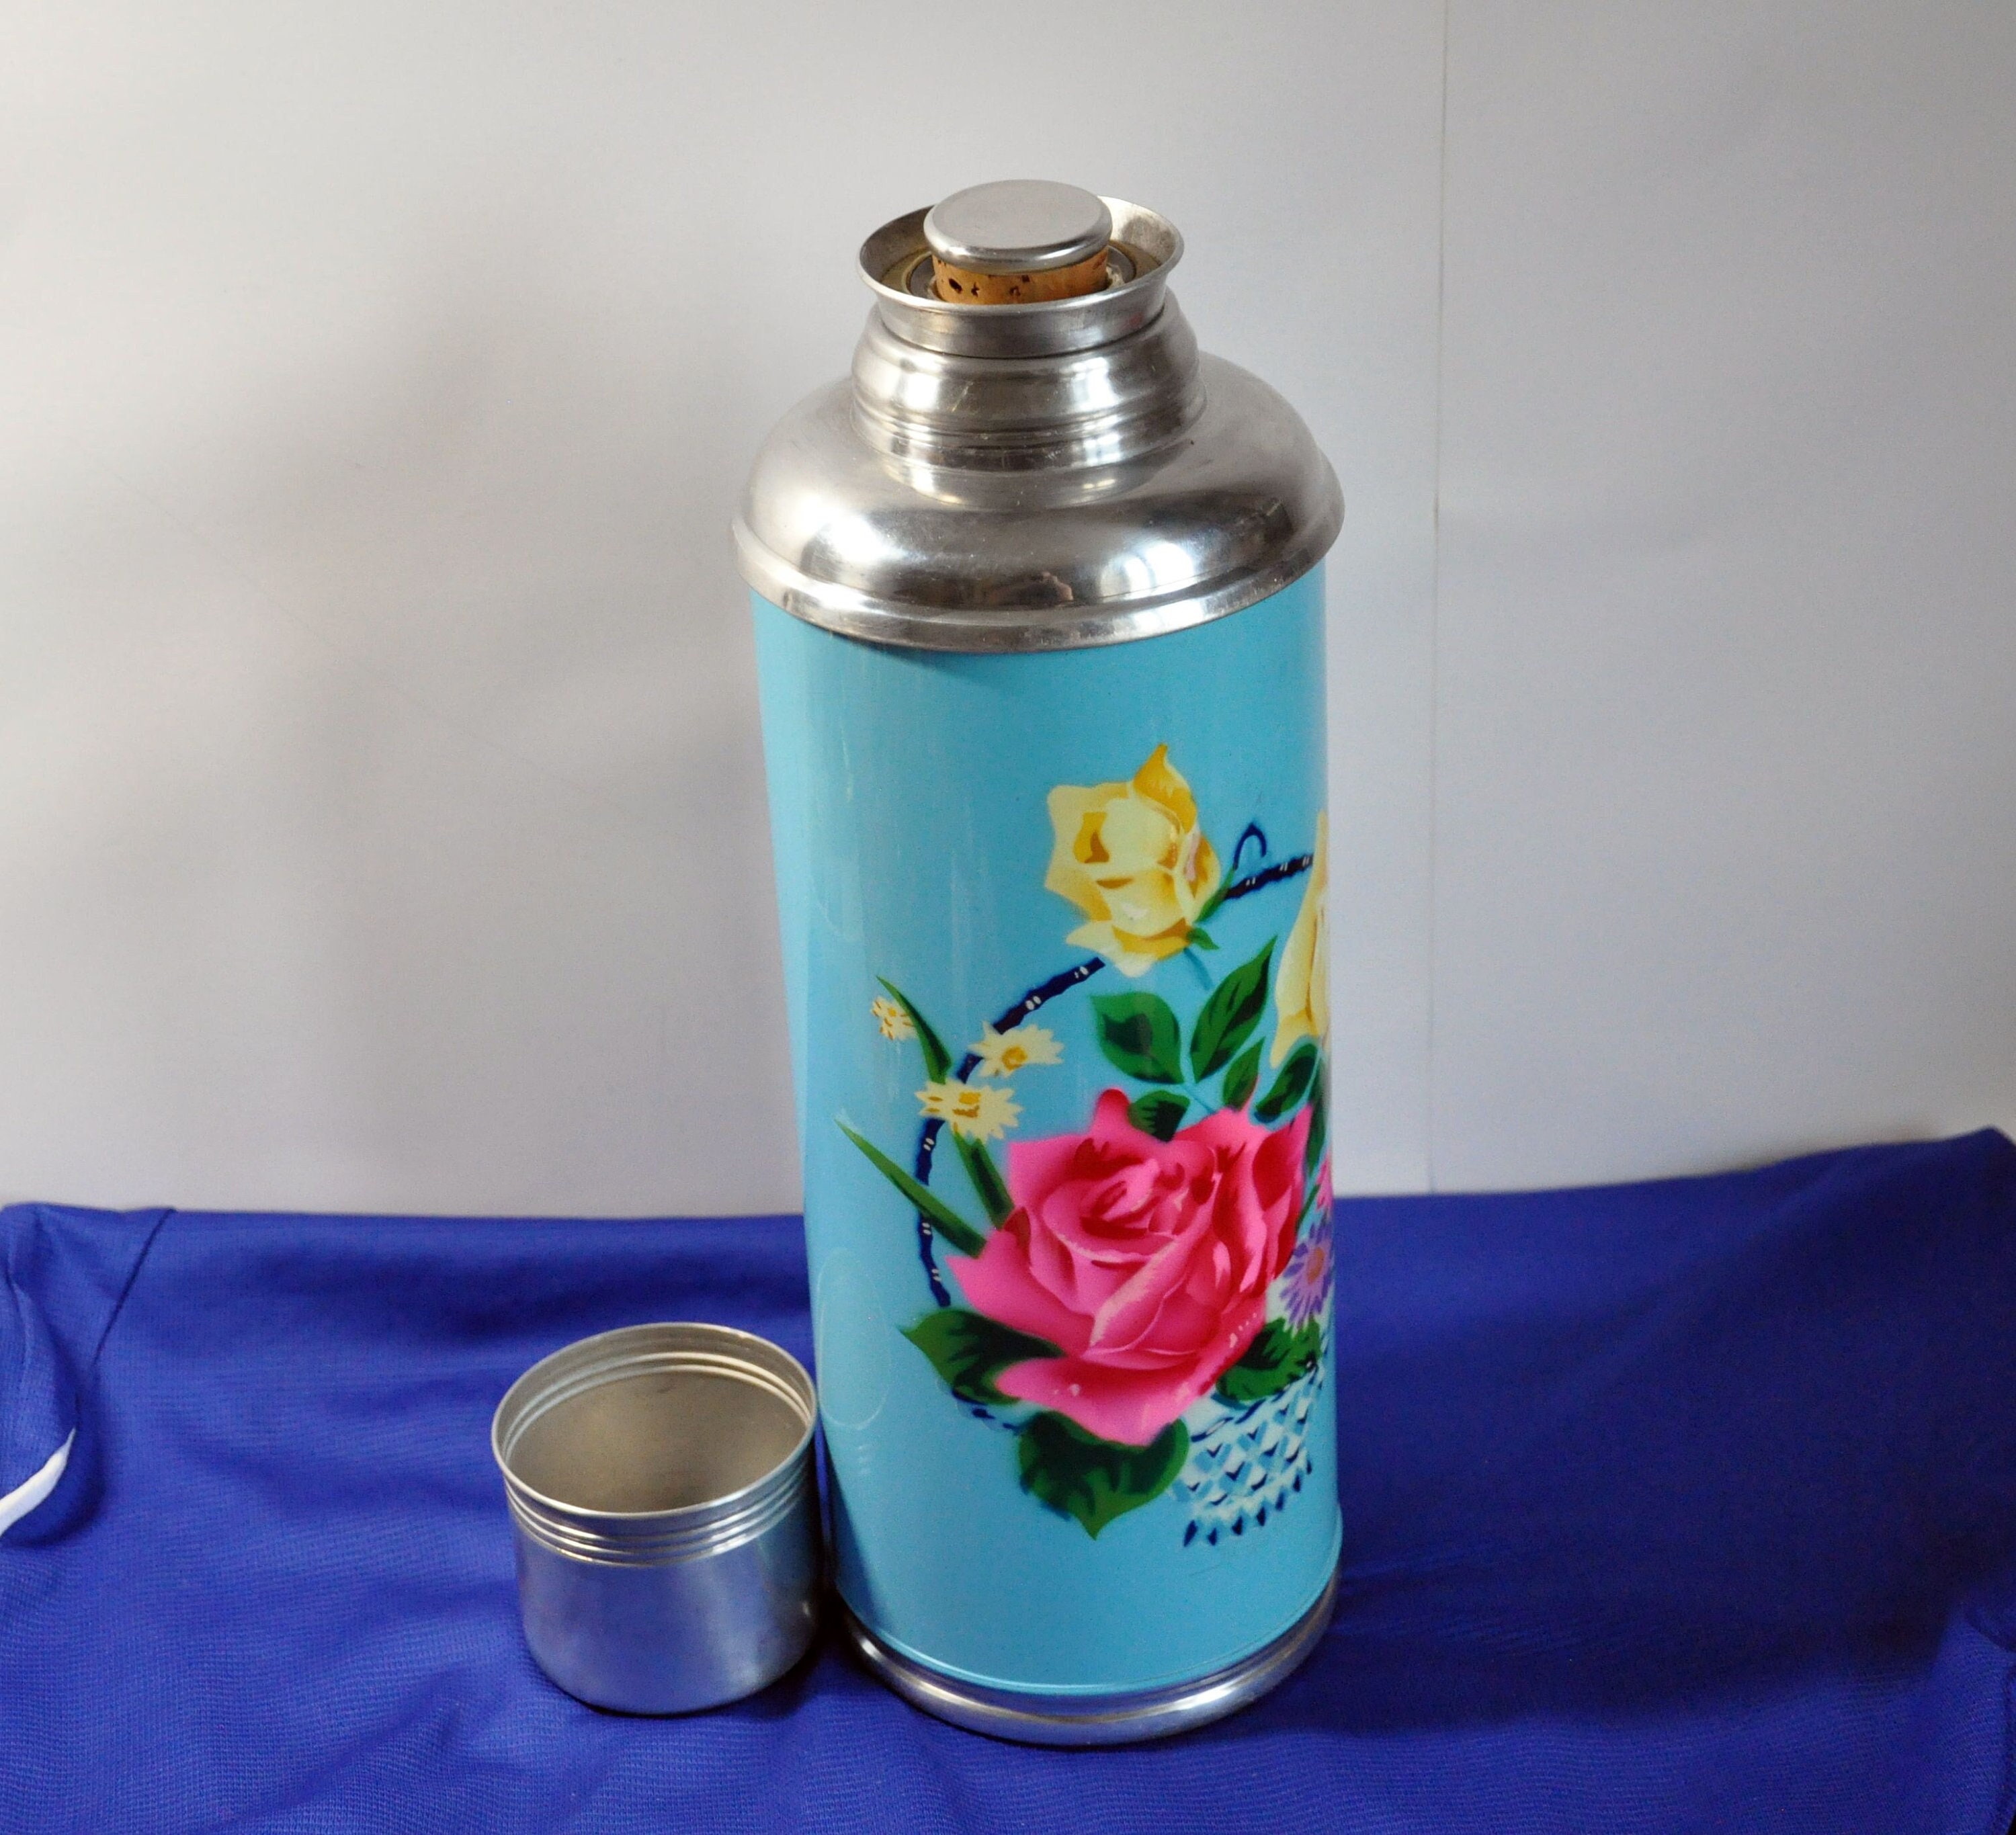 Thermos Made in Usa for Hiking, Camping or Other Aids 